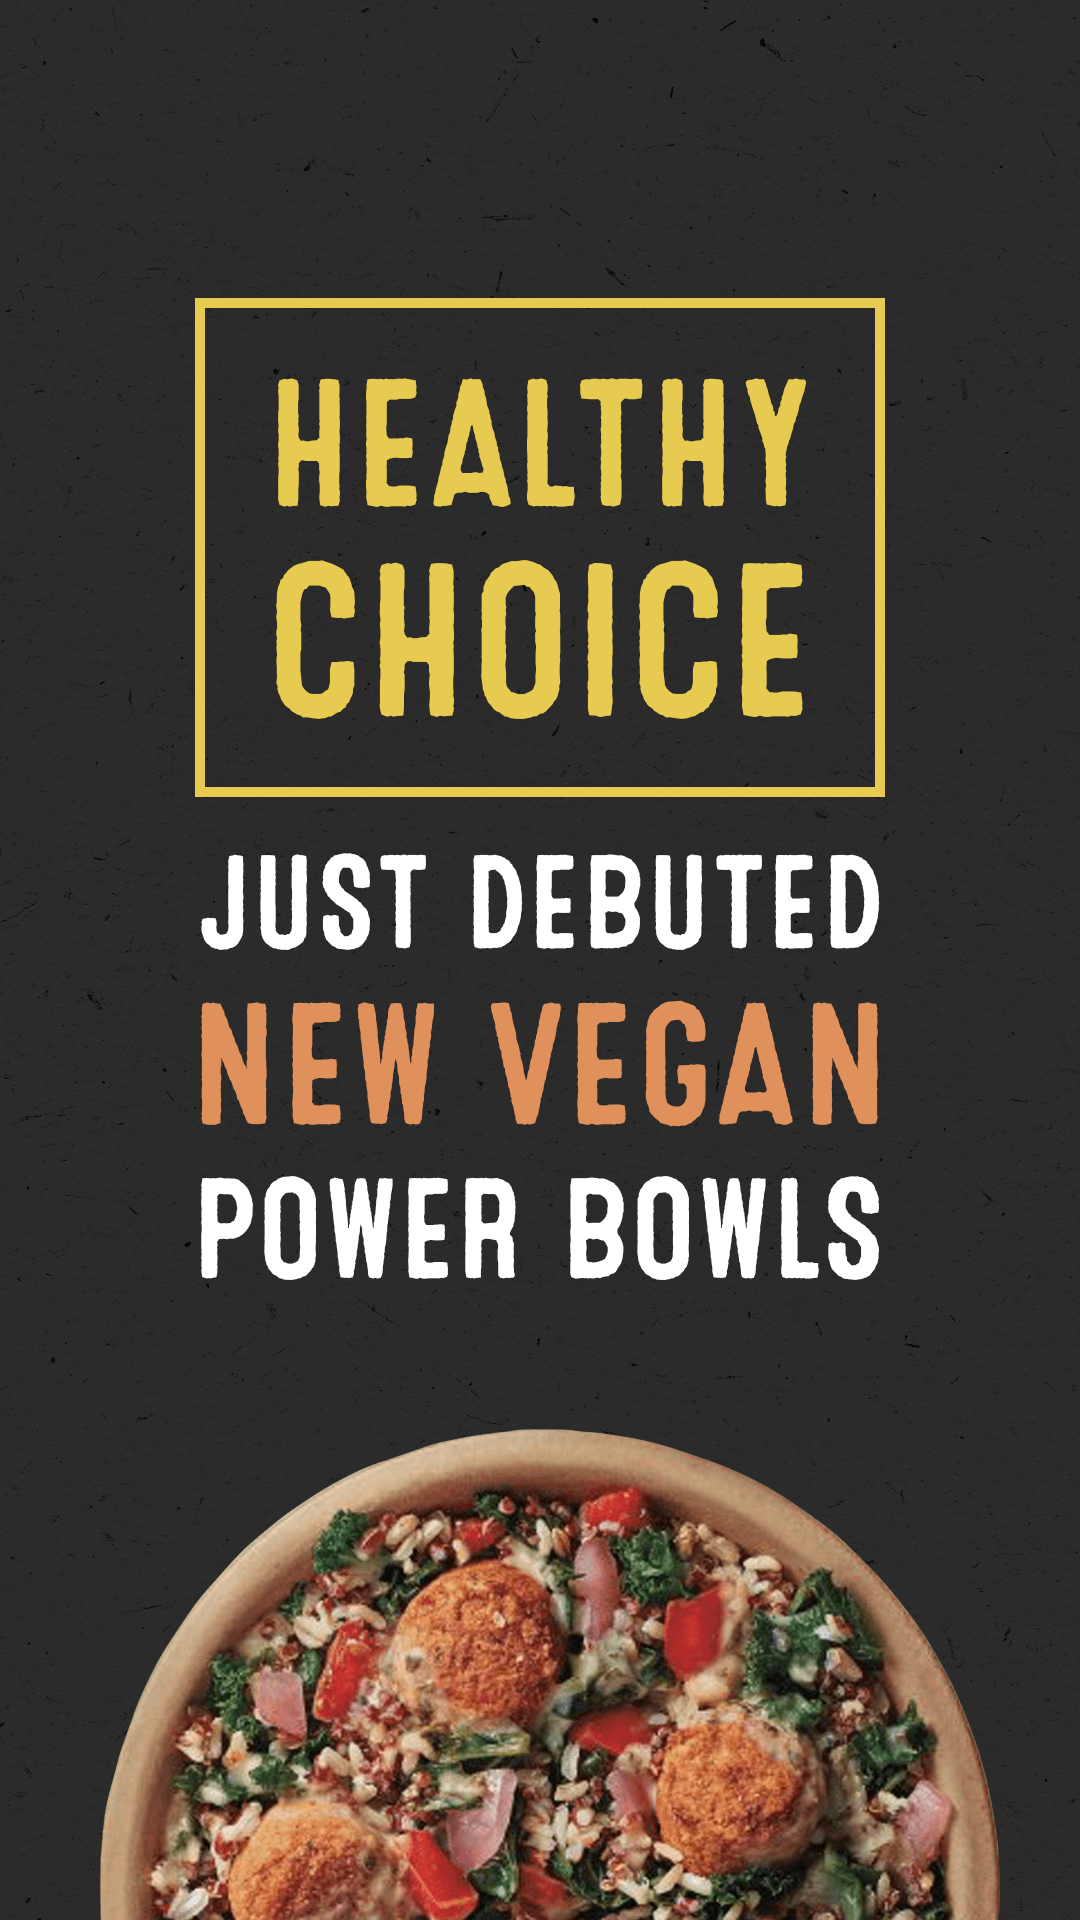 Healthy Choice Just Debuted New Vegan Power Bowls